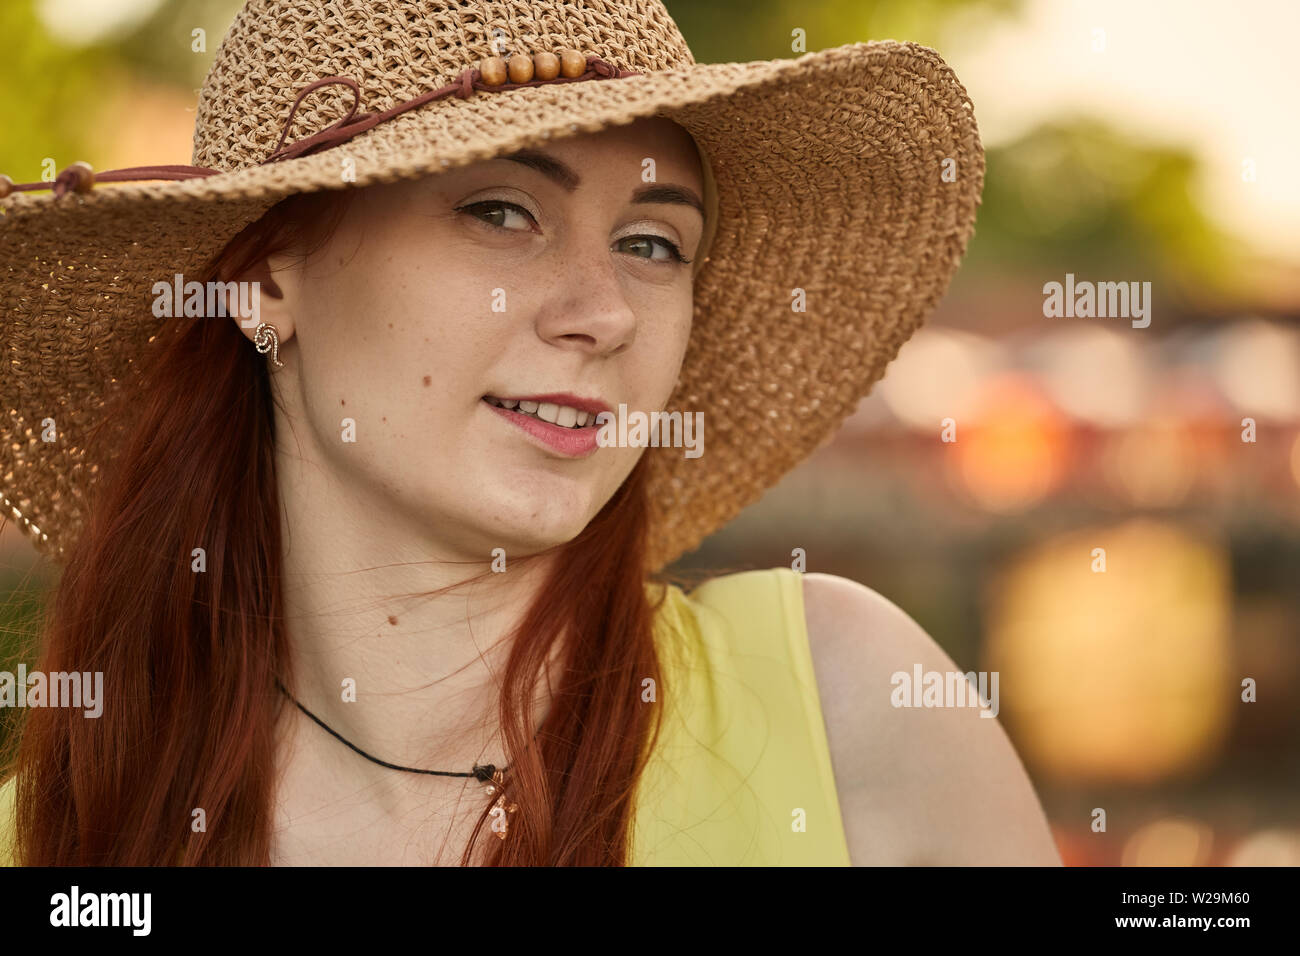 pretty red hair girl in sun hat looking at camera, smiling, toned image Stock Photo